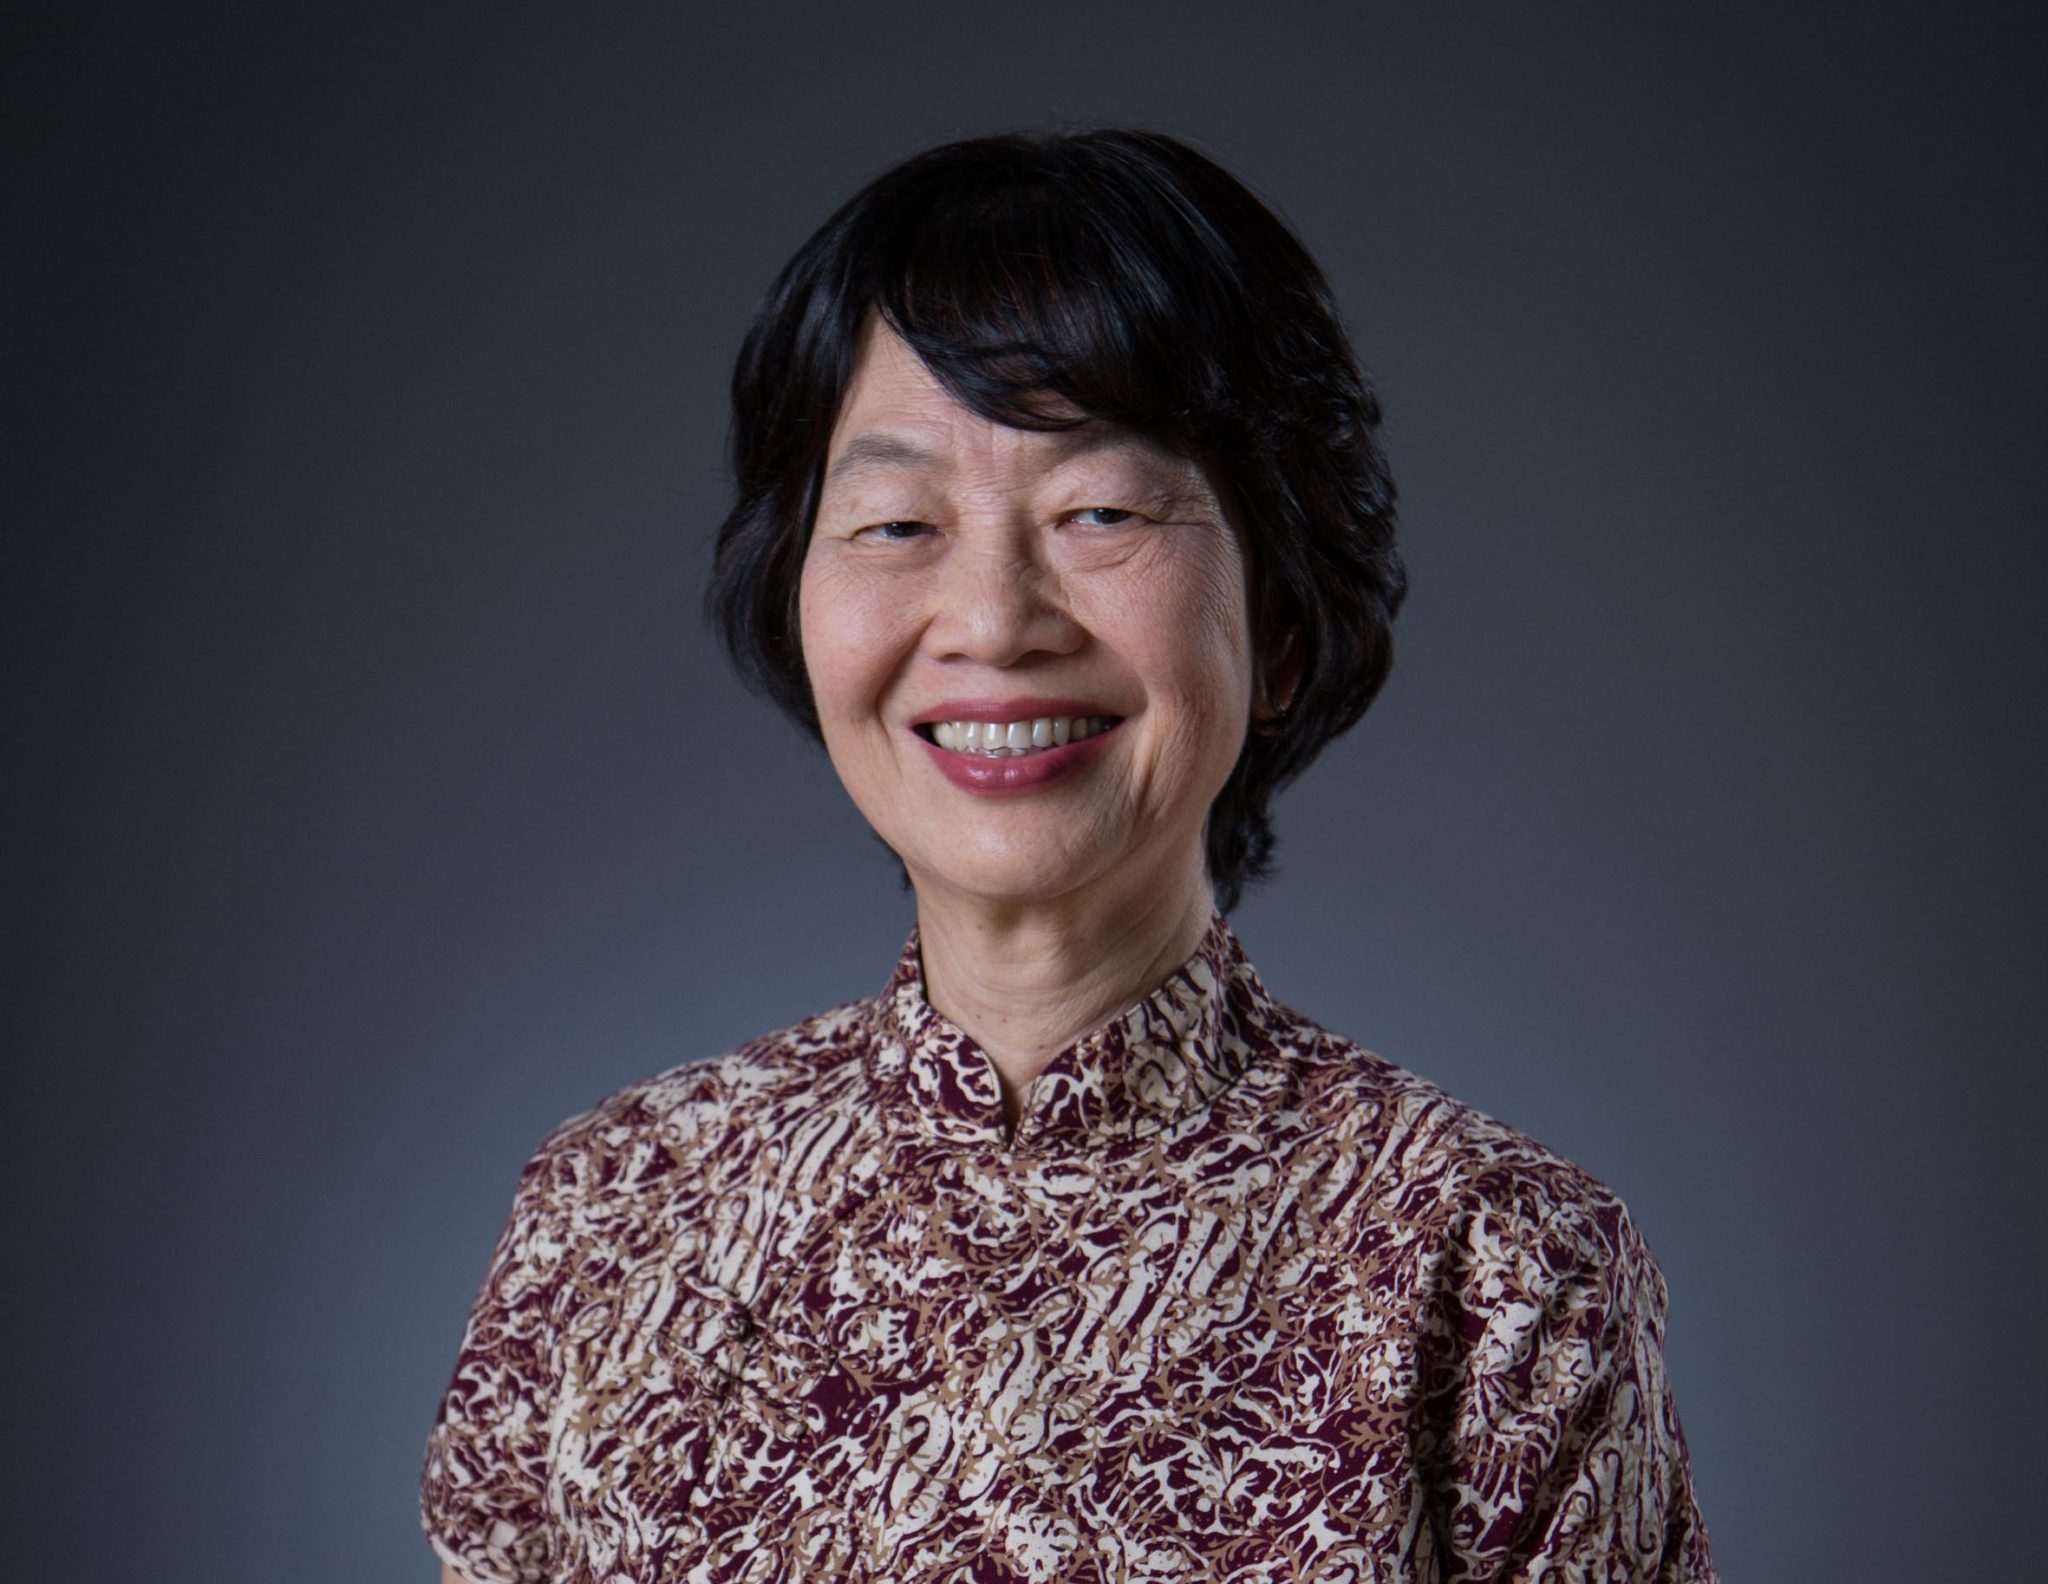 A headshot of smiling Hoon Eng Khoo who has short black hair and is wearing a red batik-patterned top.